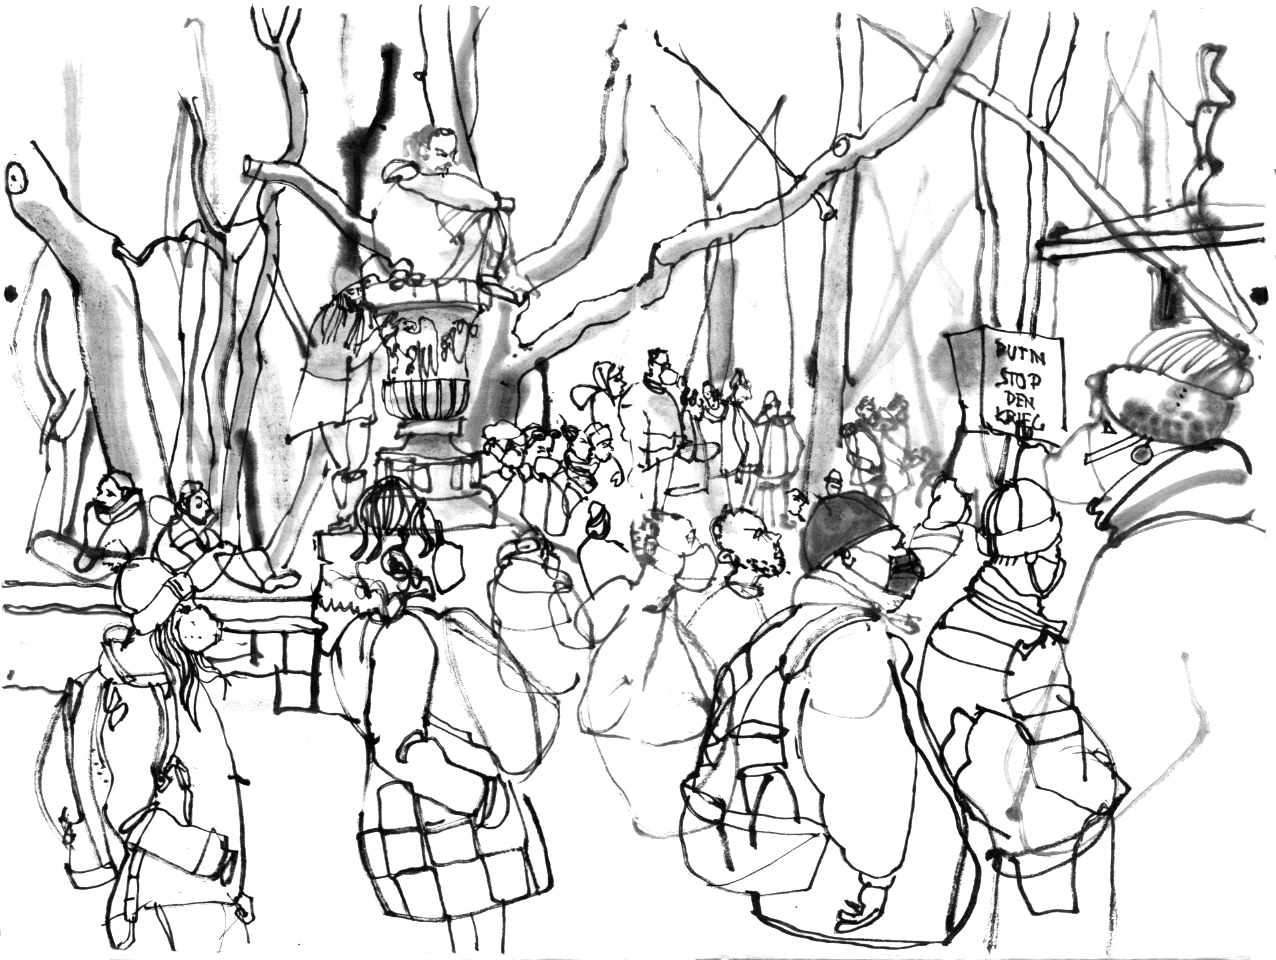 Ink drawing of an demonstration